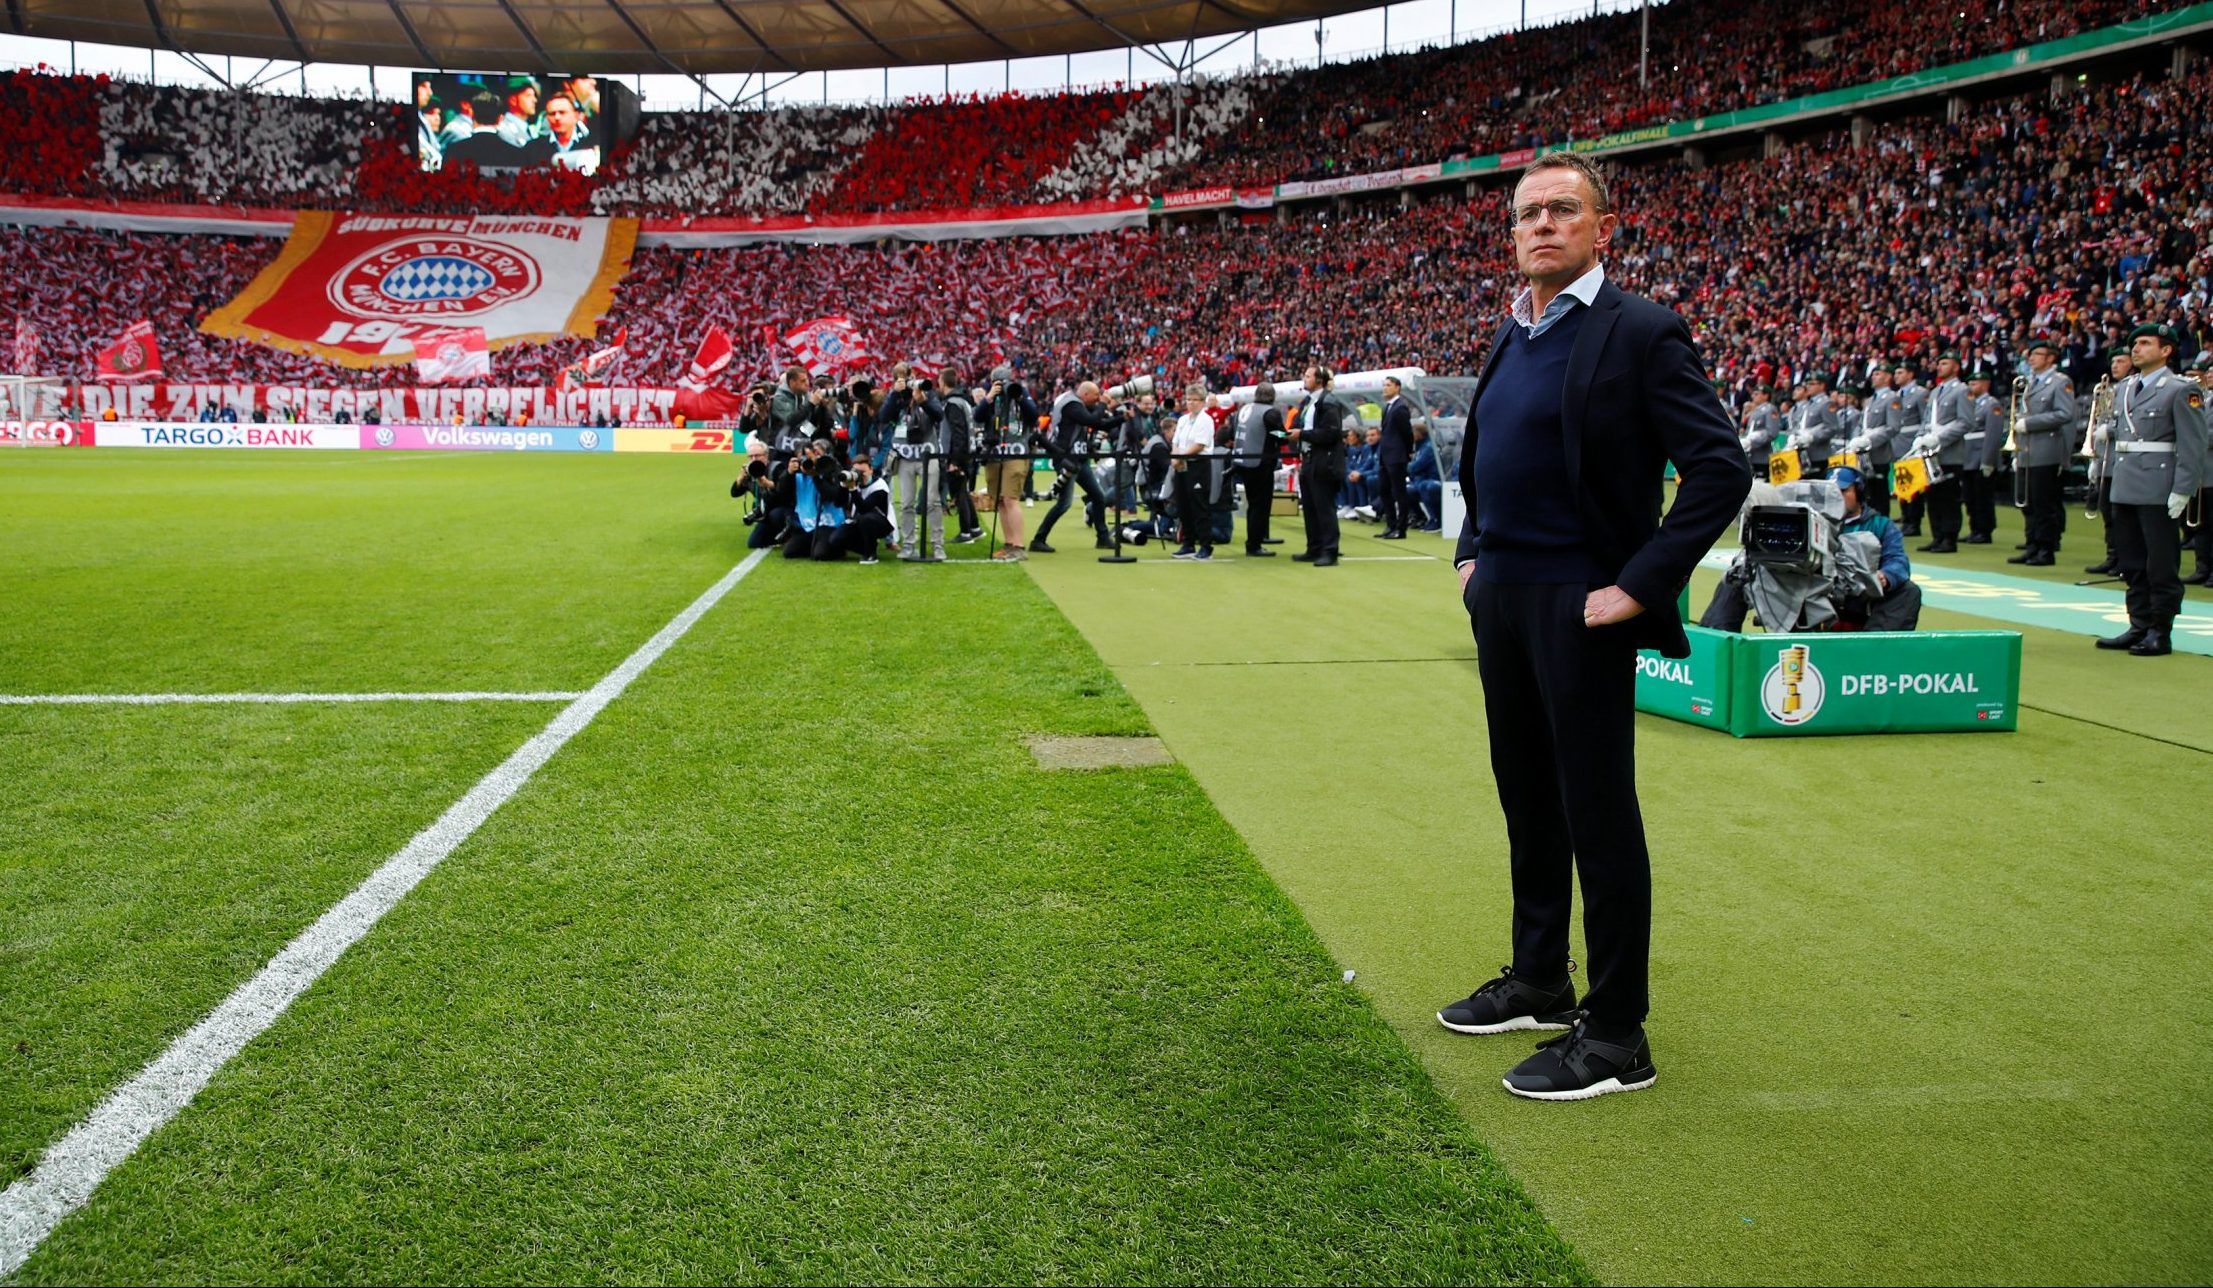 former leipzig coach and sporting director ralf rangnick on touchline pre game dfb cup final bayern munich